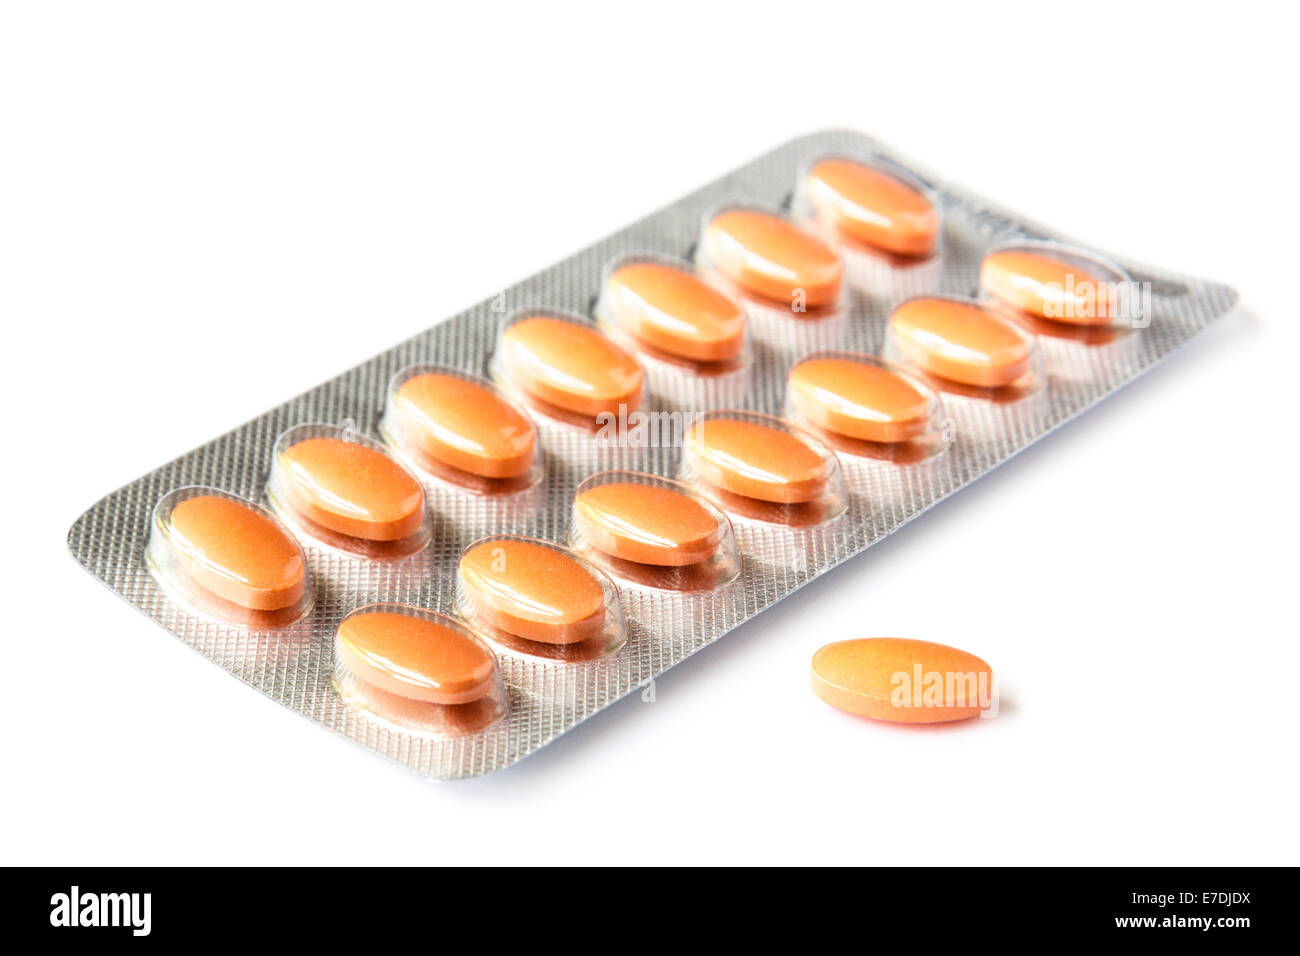 Simvastatin 40 mg statin tablets prescribed medication for treating high cholesterol in a pills foil unbranded blister pack isolated on white Stock Photo